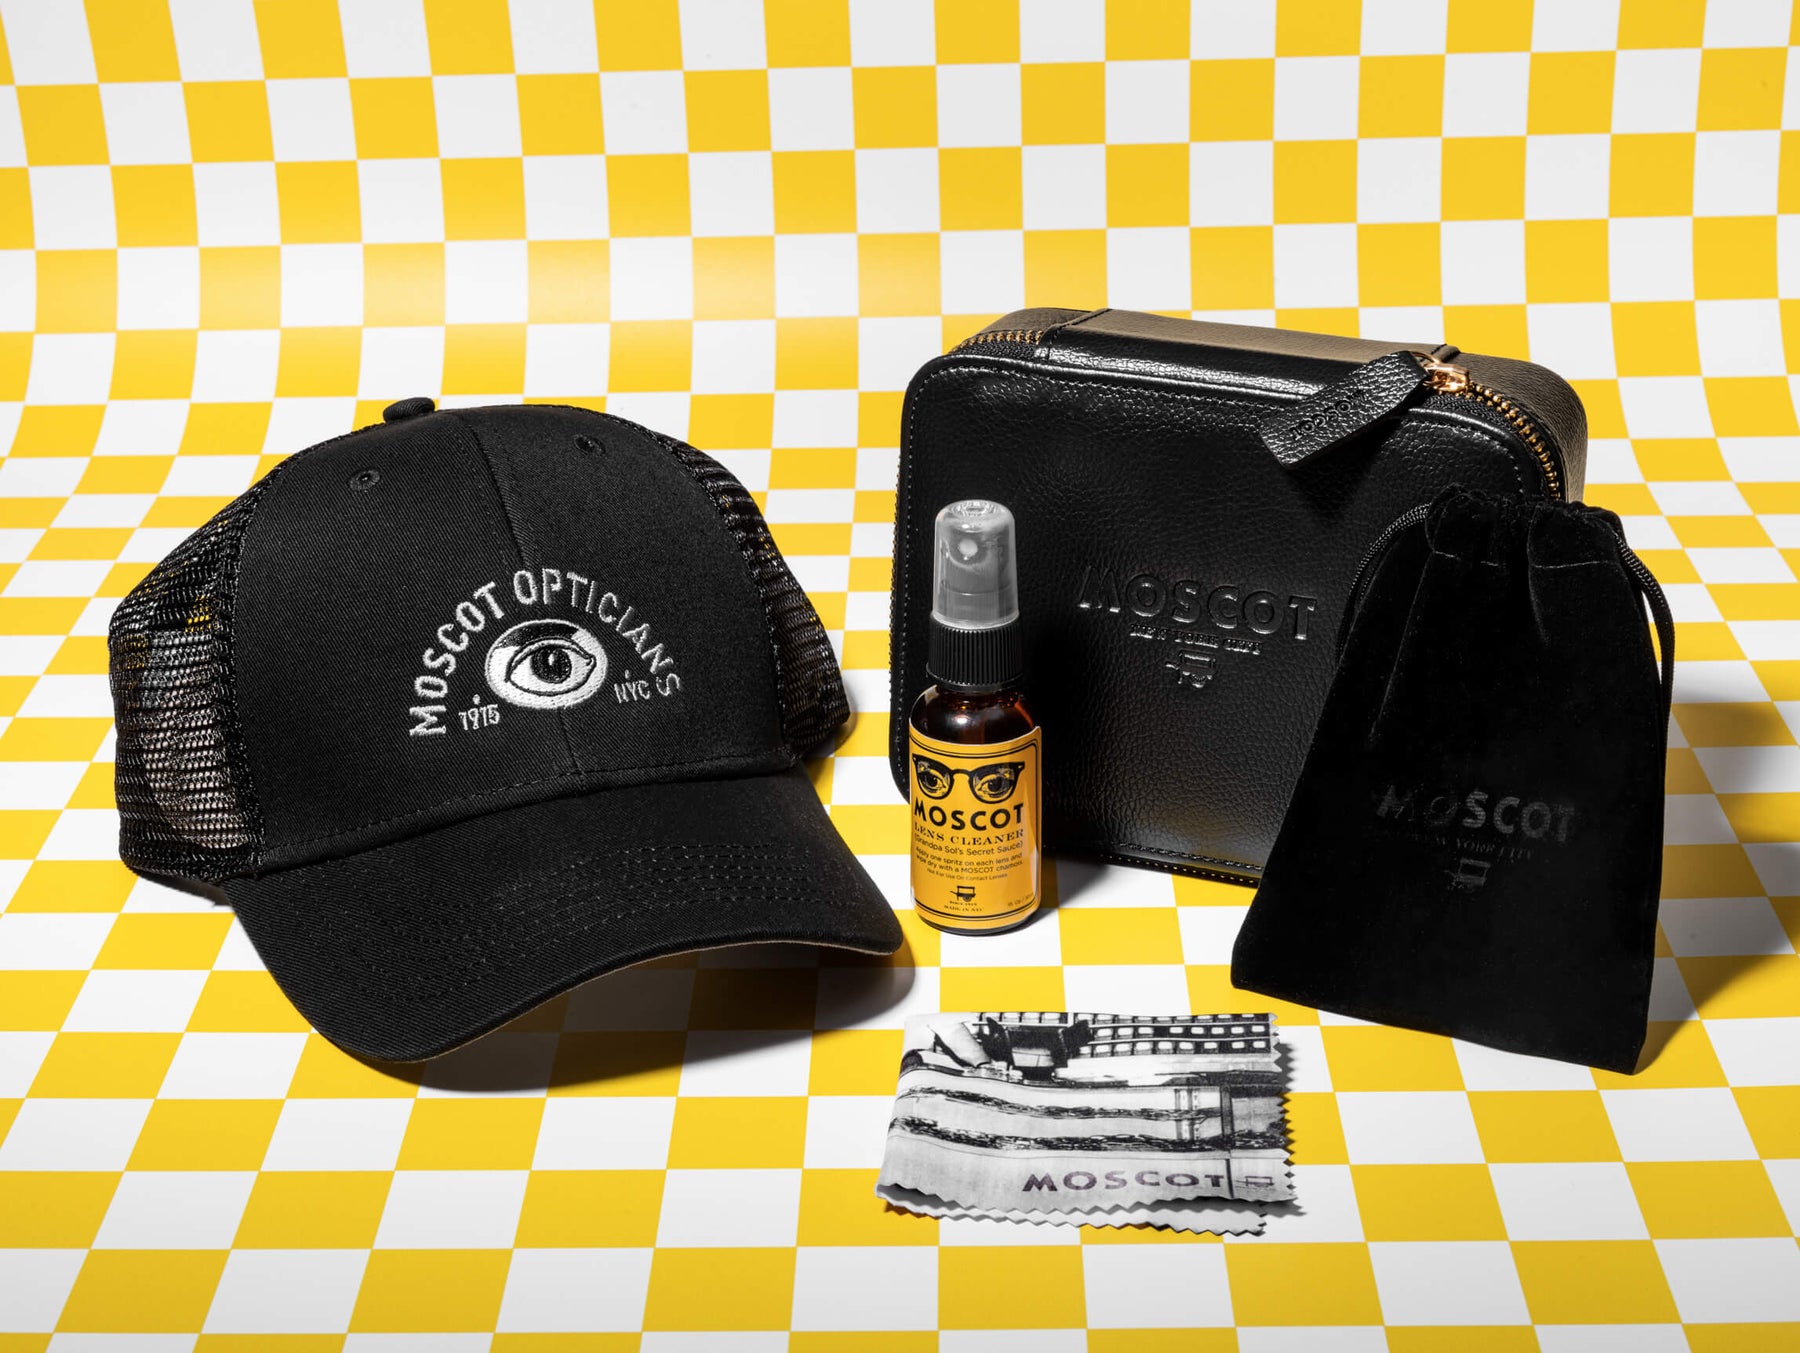 The ESSENTIALS KIT, includes The TRAVEL CASE MINI, SOL'S SECRET SAUCE, and The SNAPBACK